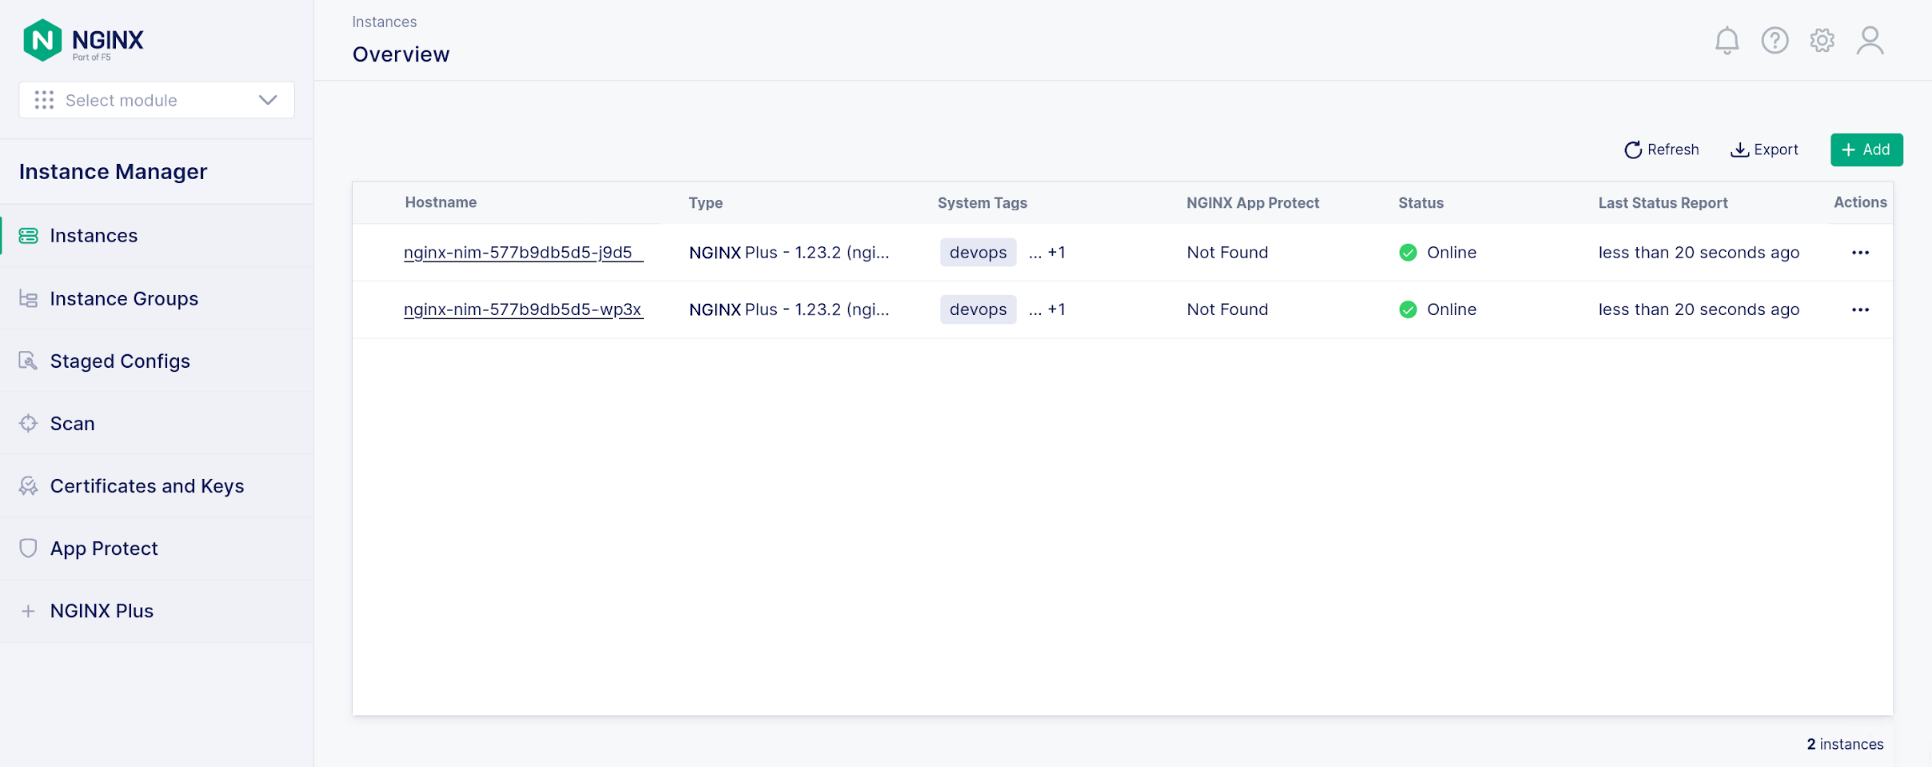 Screenshot of Instances Overview window in NGINX Management Suite Instance Manager version 2.7.0